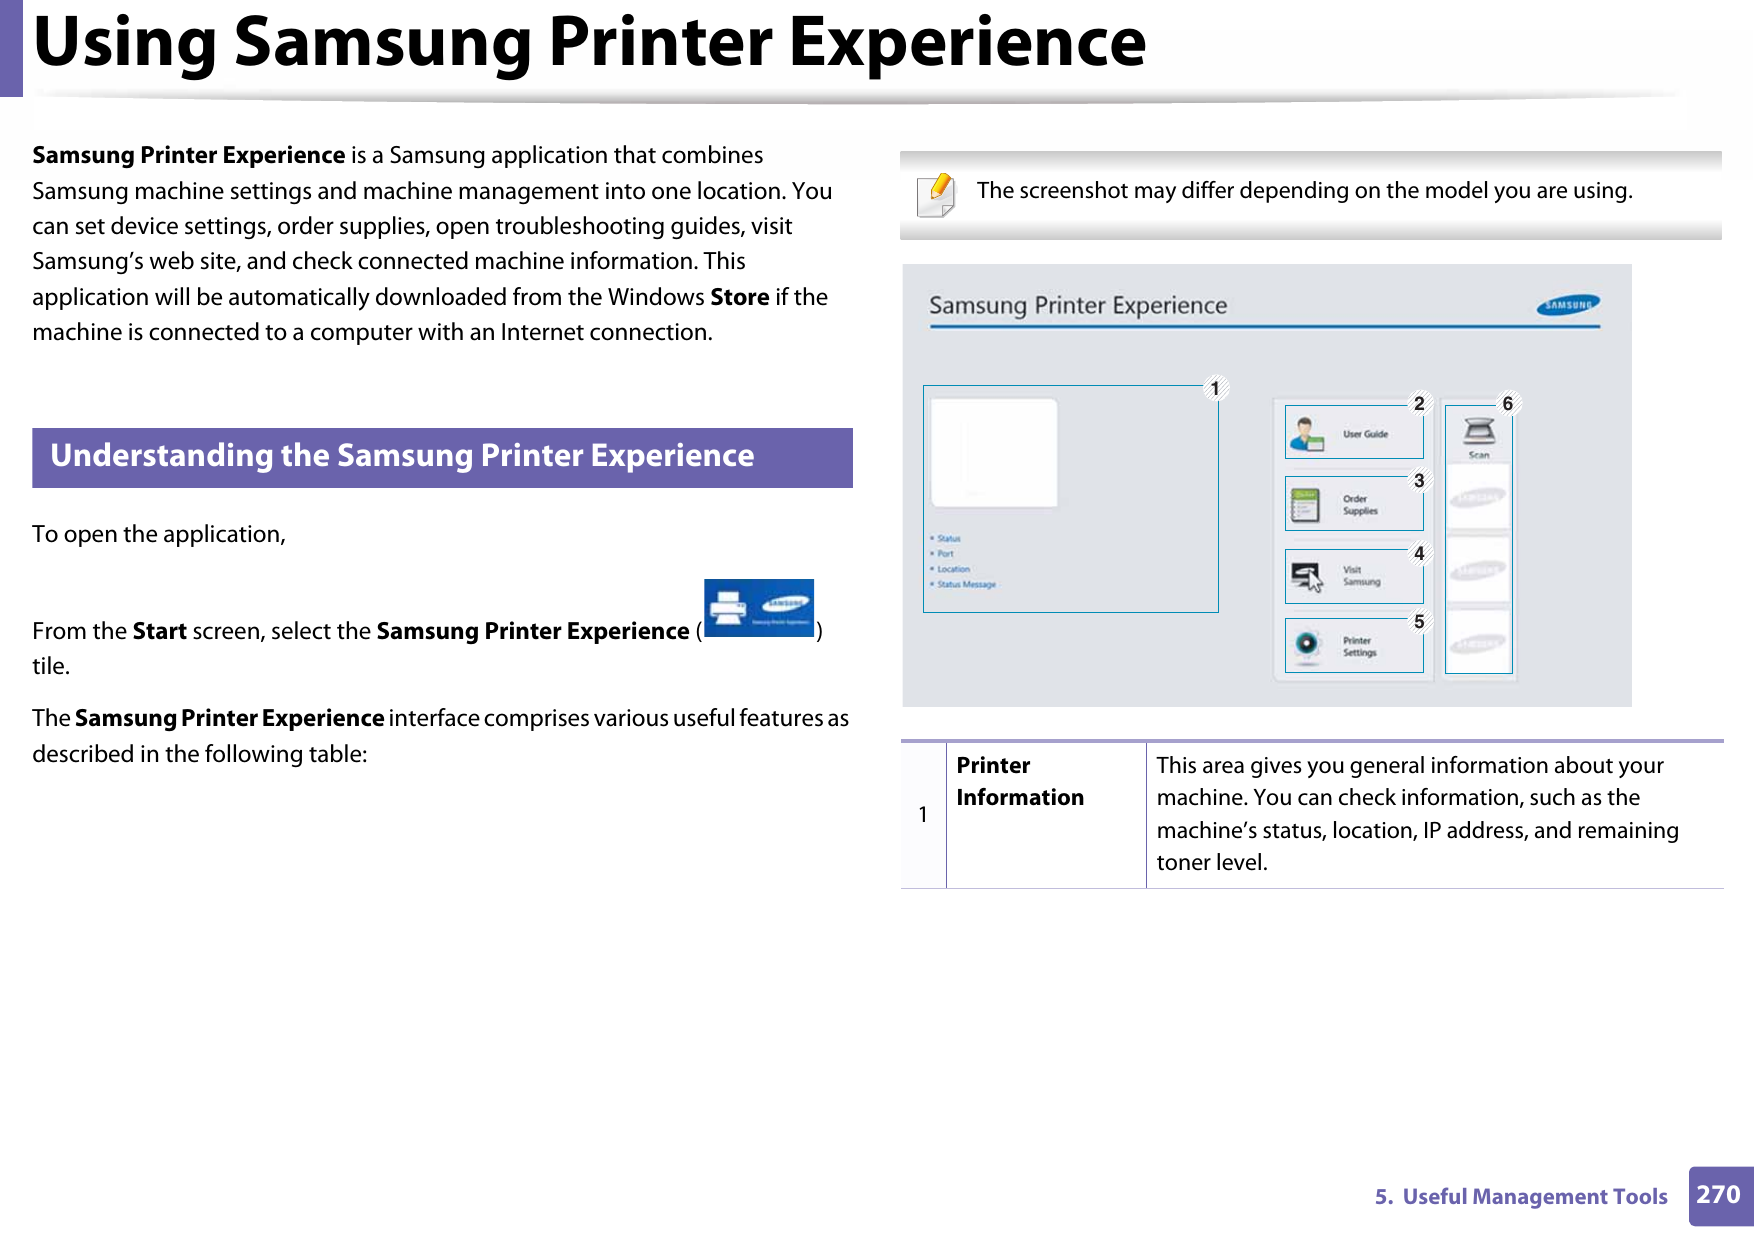 2705.  Useful Management ToolsUsing Samsung Printer Experience Samsung Printer Experience is a Samsung application that combines Samsung machine settings and machine management into one location. You can set device settings, order supplies, open troubleshooting guides, visit Samsung’s web site, and check connected machine information. This application will be automatically downloaded from the Windows Store if the machine is connected to a computer with an Internet connection. 8 Understanding the Samsung Printer ExperienceTo open the application, From the Start screen, select the Samsung Printer Experience () tile. The Samsung Printer Experience interface comprises various useful features as described in the following table: The screenshot may differ depending on the model you are using. 1Printer InformationThis area gives you general information about your machine. You can check information, such as the machine’s status, location, IP address, and remaining toner level.126345